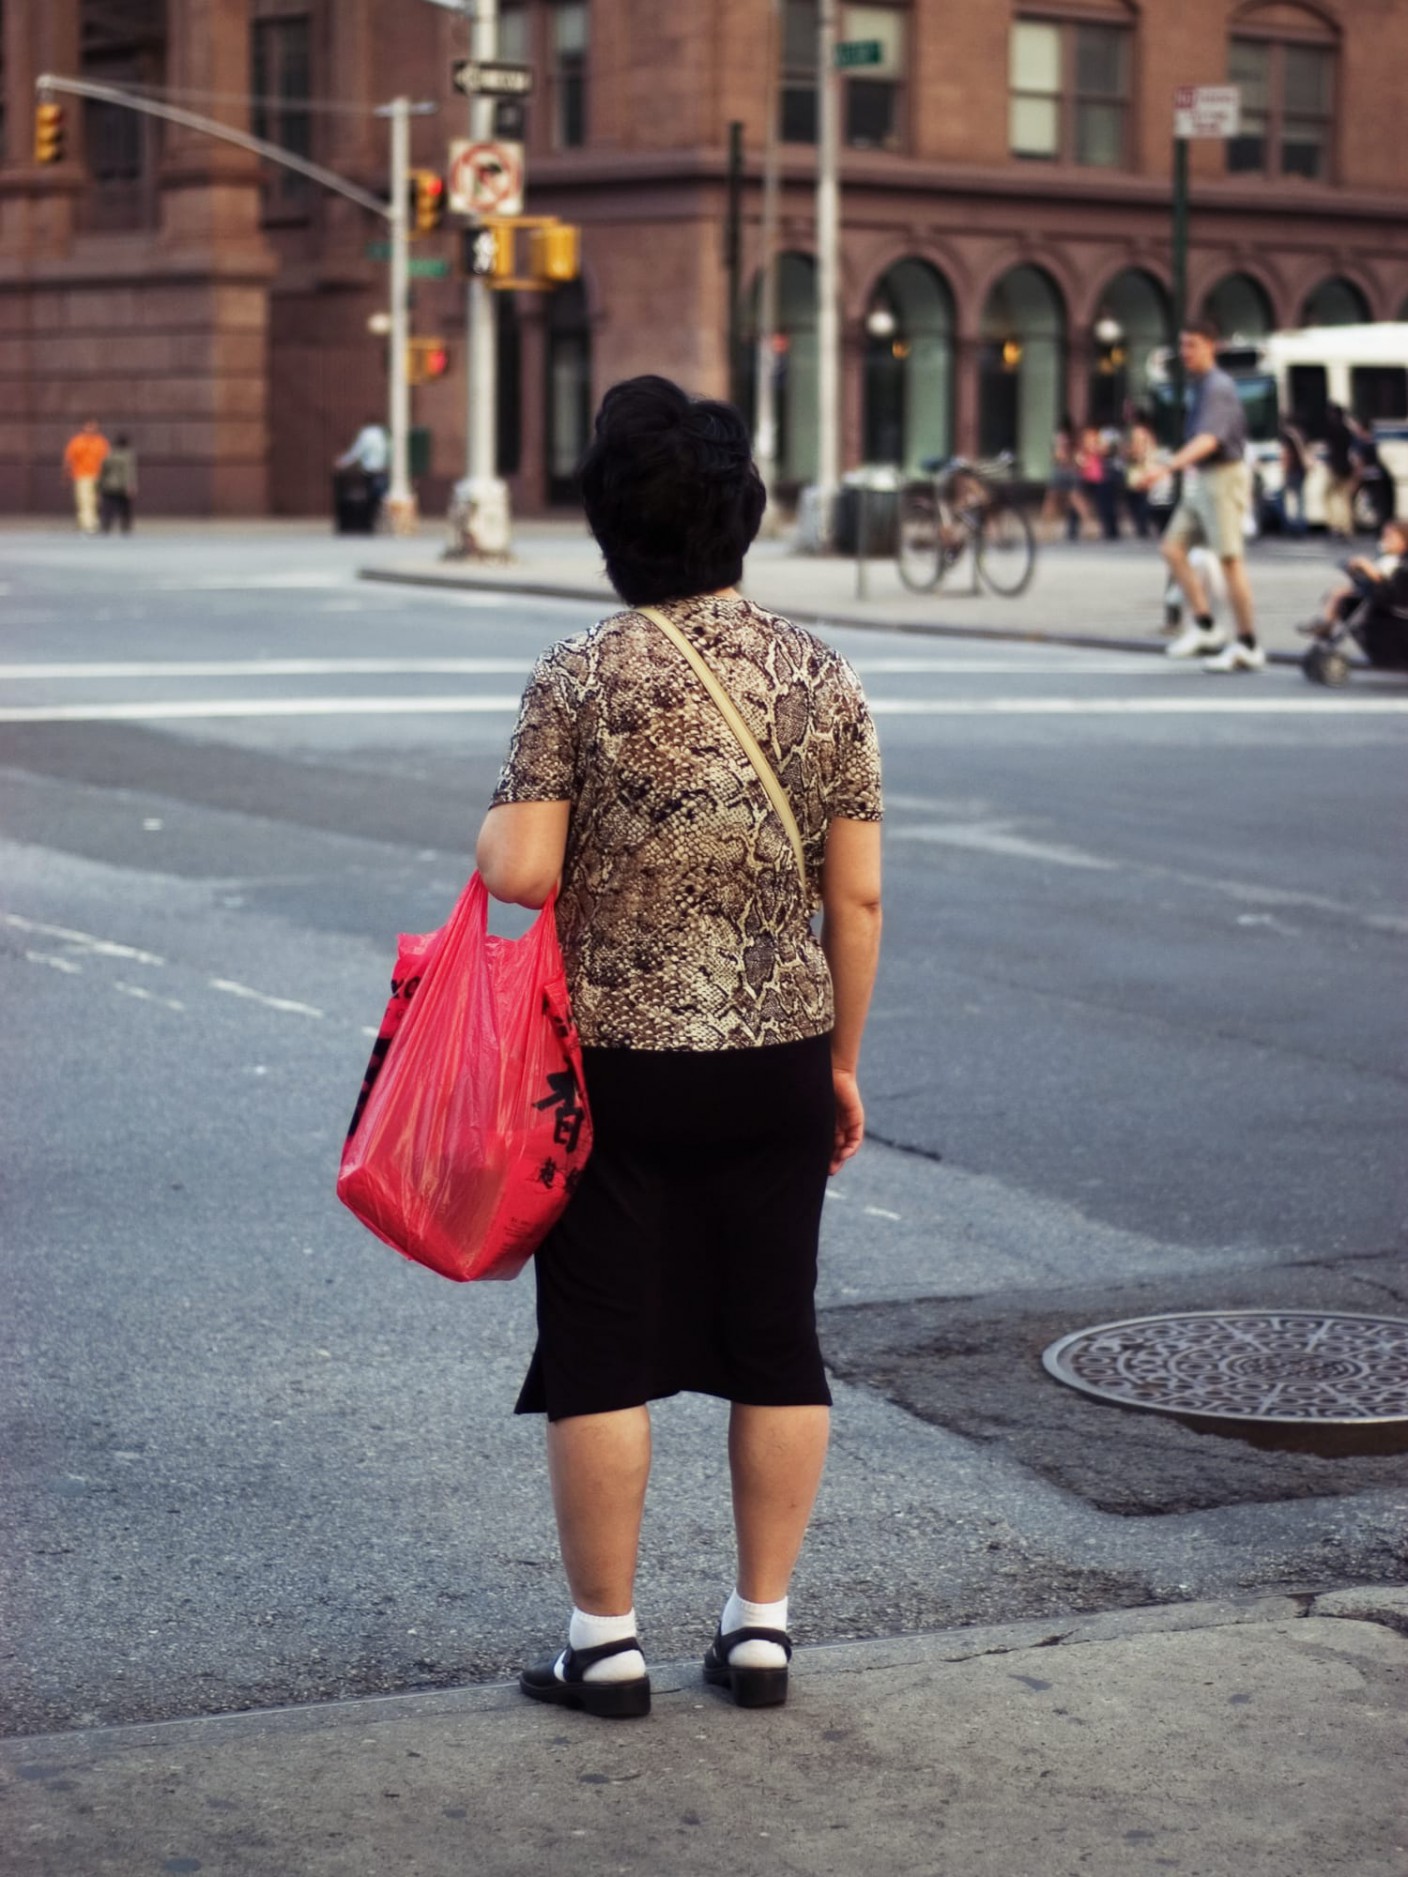 Portrait of a person on a sidewalk, carrying a red plastic bag, wearing an animal patterned shirt, seen from behind